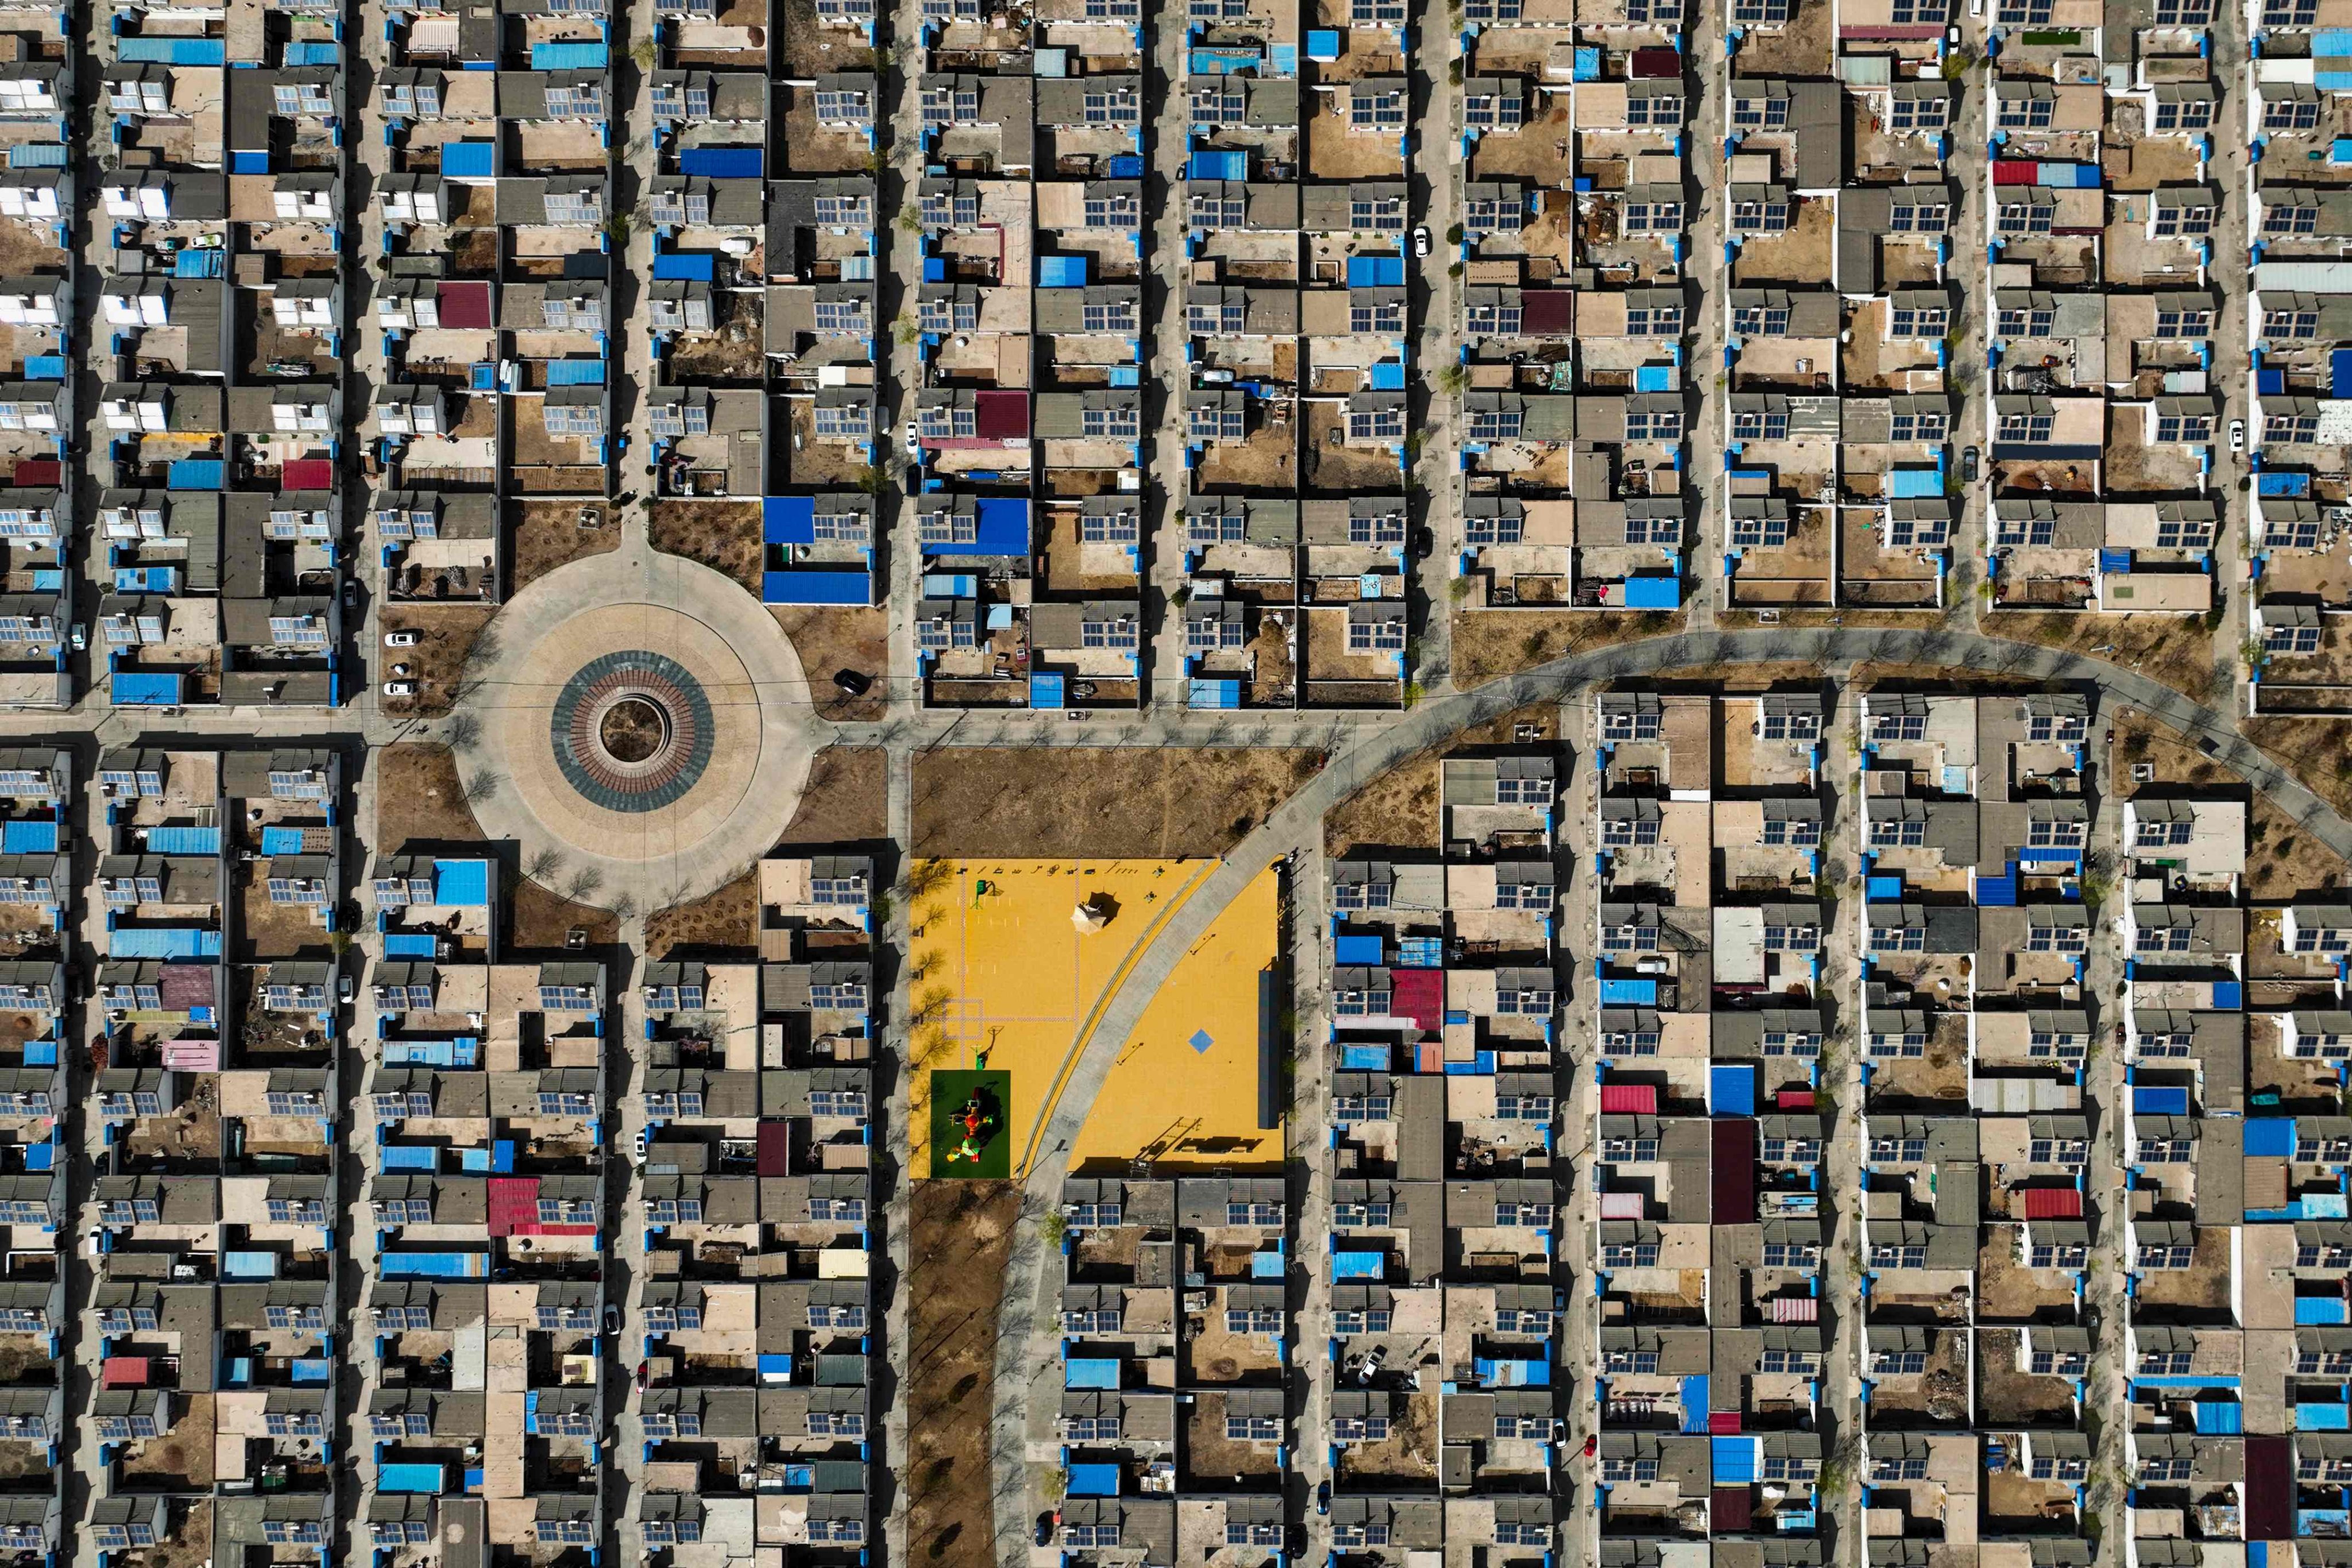 Residential buildings with solar panels are seen from the air in Yinchuan, Ningxia, in northwestern China, on March 31. US Treasury Secretary Janet Yellen recently said China should address its overcapacity issue, particularly with regard to clean energy products. Photo: AFP 